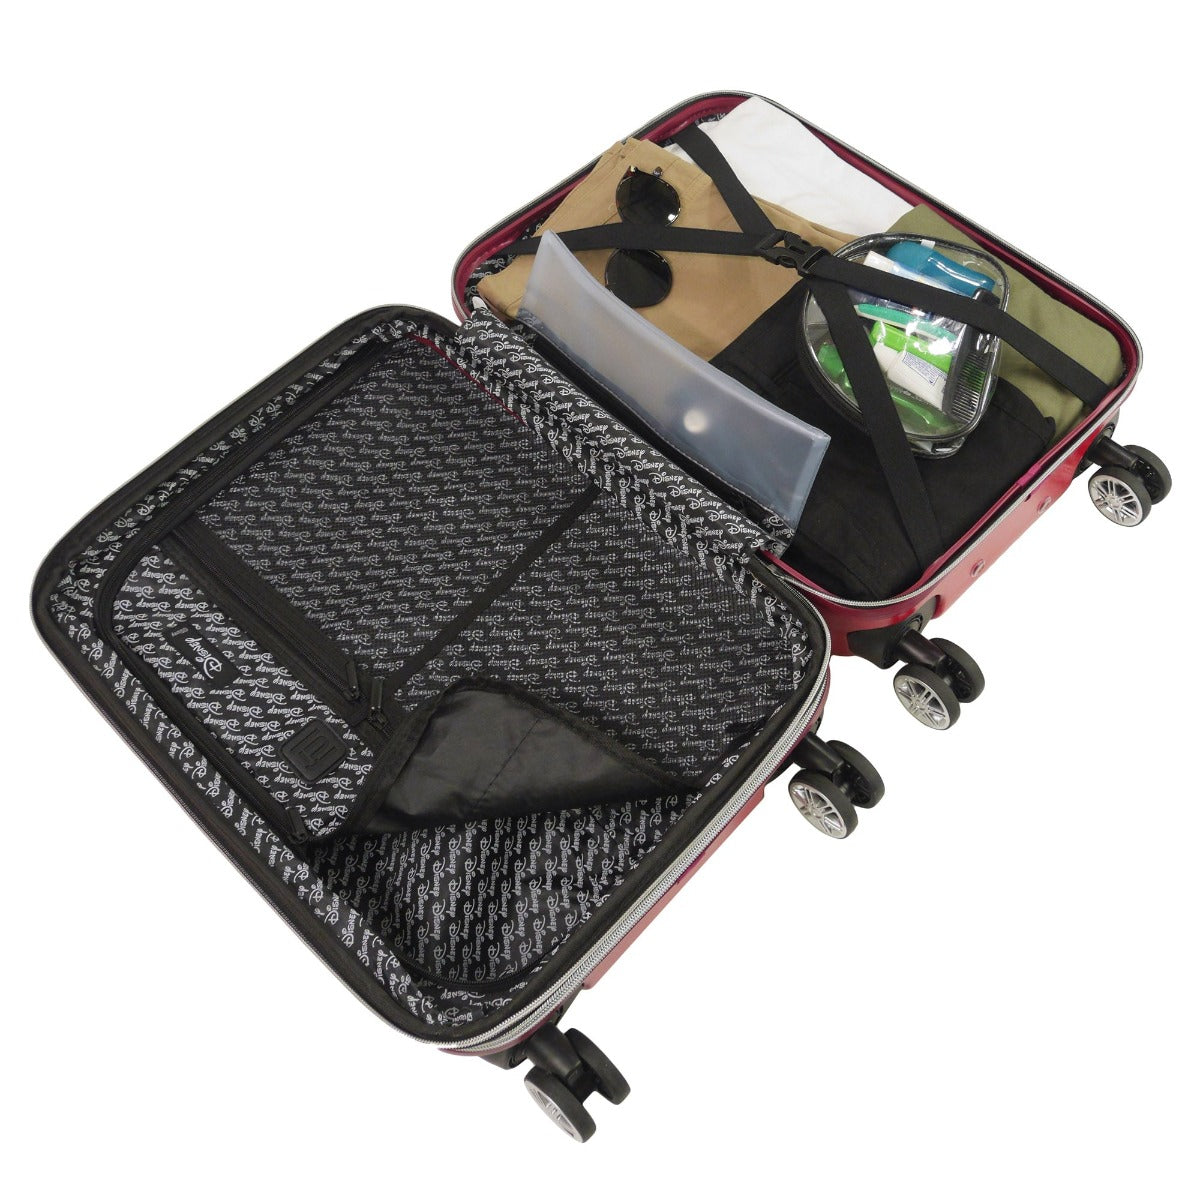 Disney Spinner Luggage by Ful with interior compression straps and zip sections for easy organization